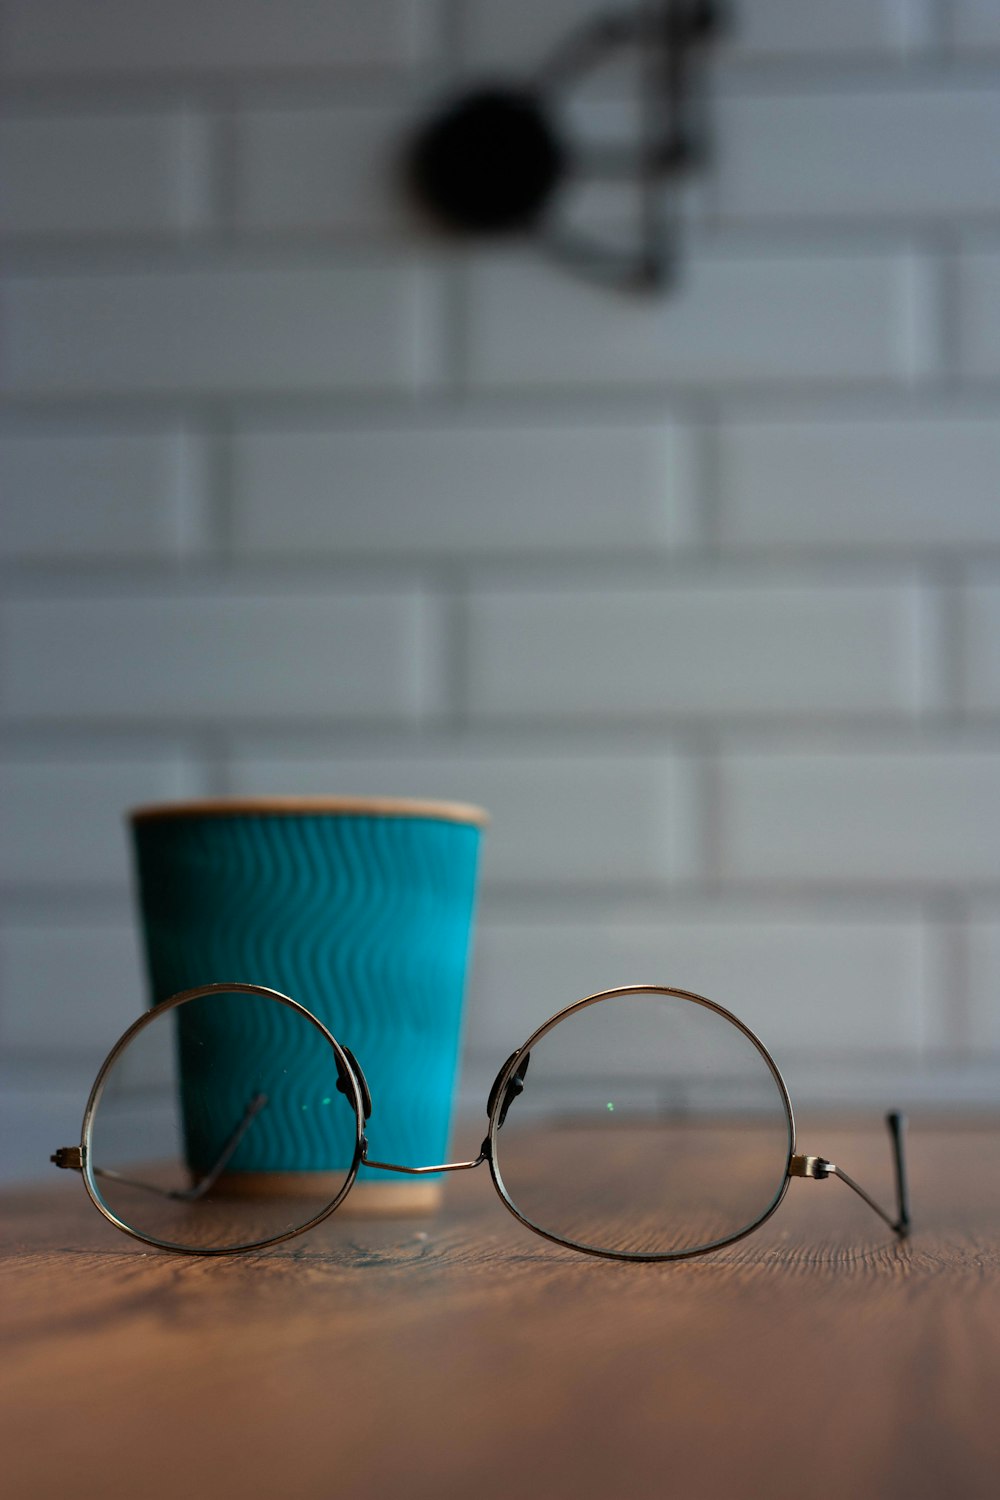 silver framed eyeglasses near blue disposable cup